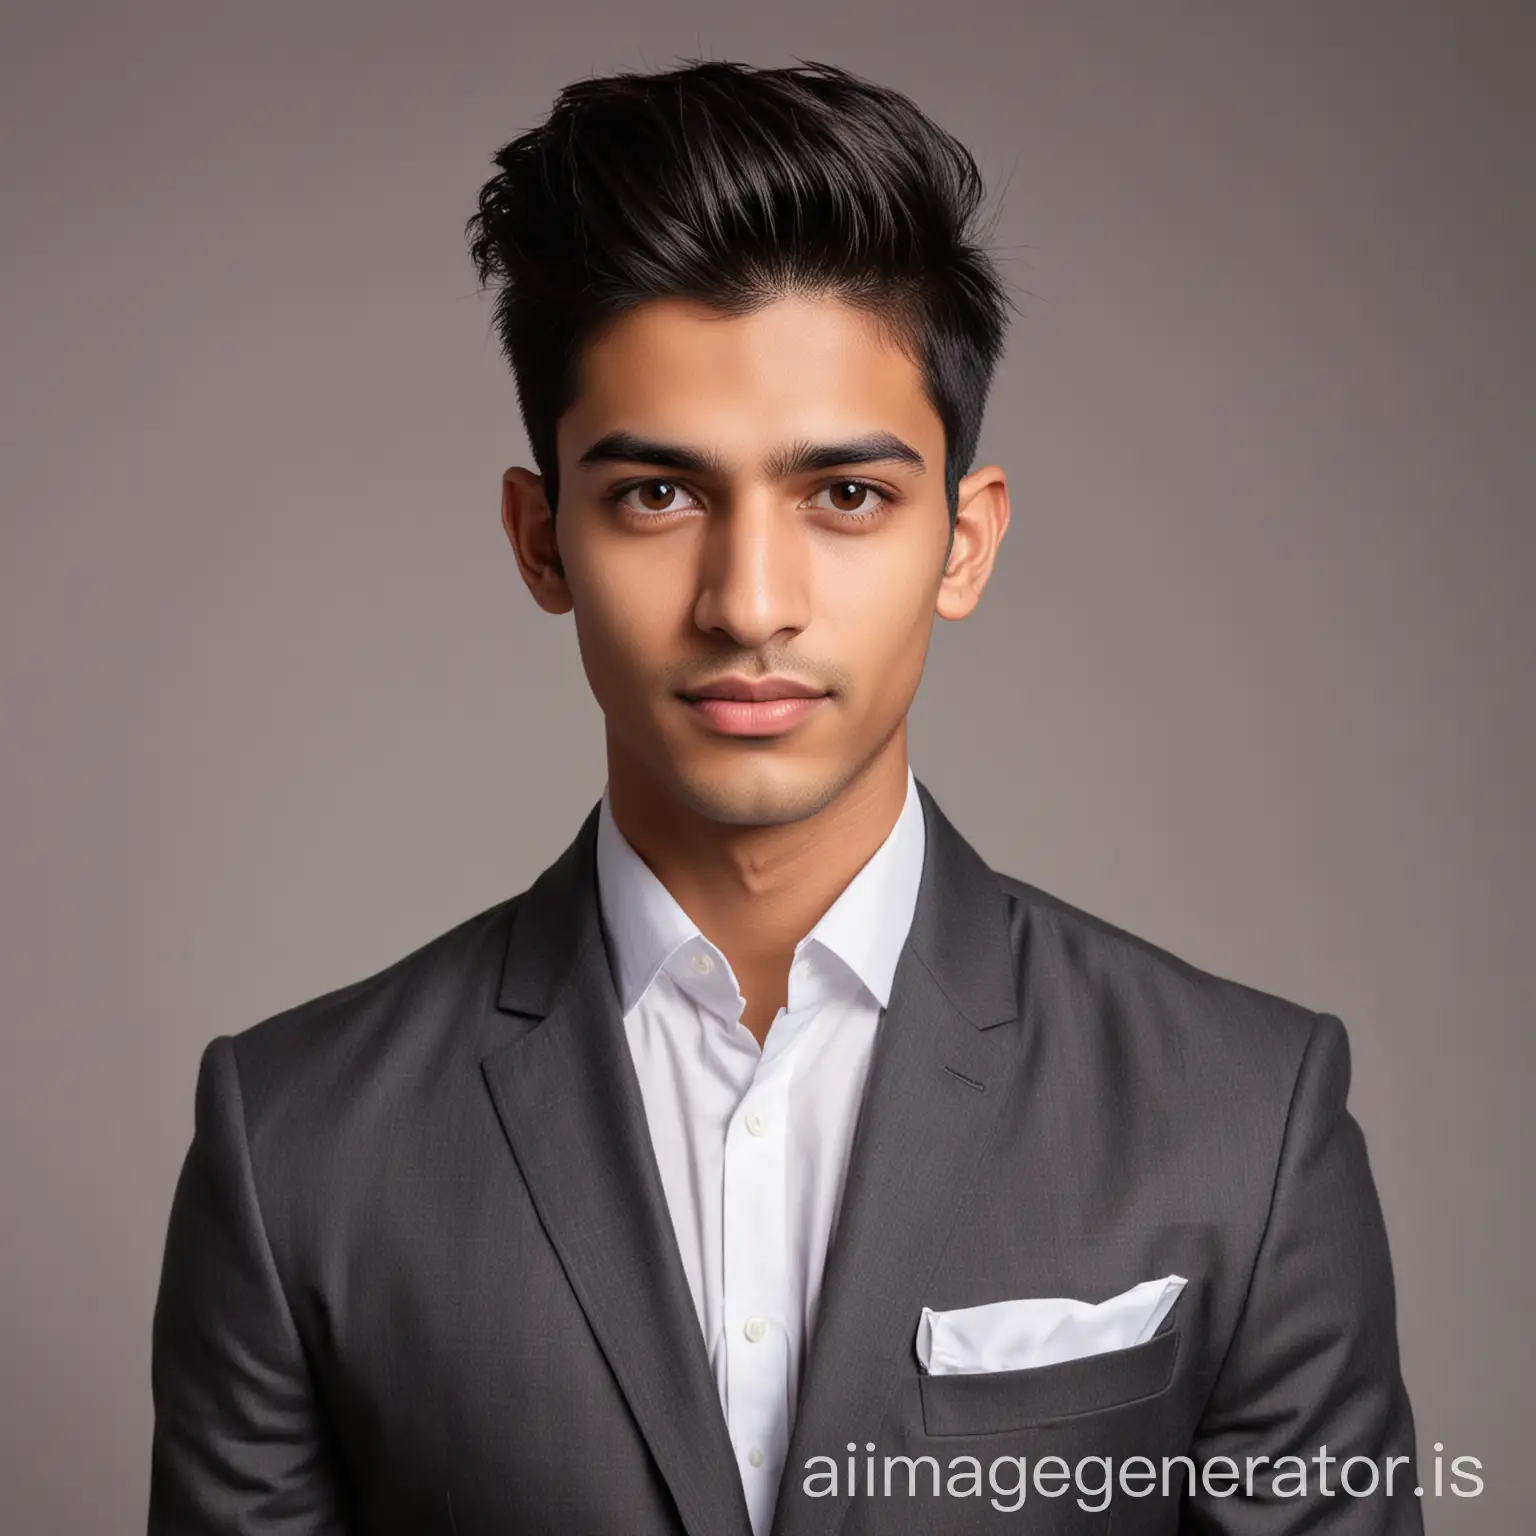 27 year old Indian teen male, slightly acne scar, fair skin, with skinny neck, slightly lighter tone, posing for a LinkedIn photo in formal wear, with Pompadour Haircut Style. Just a formal shirt